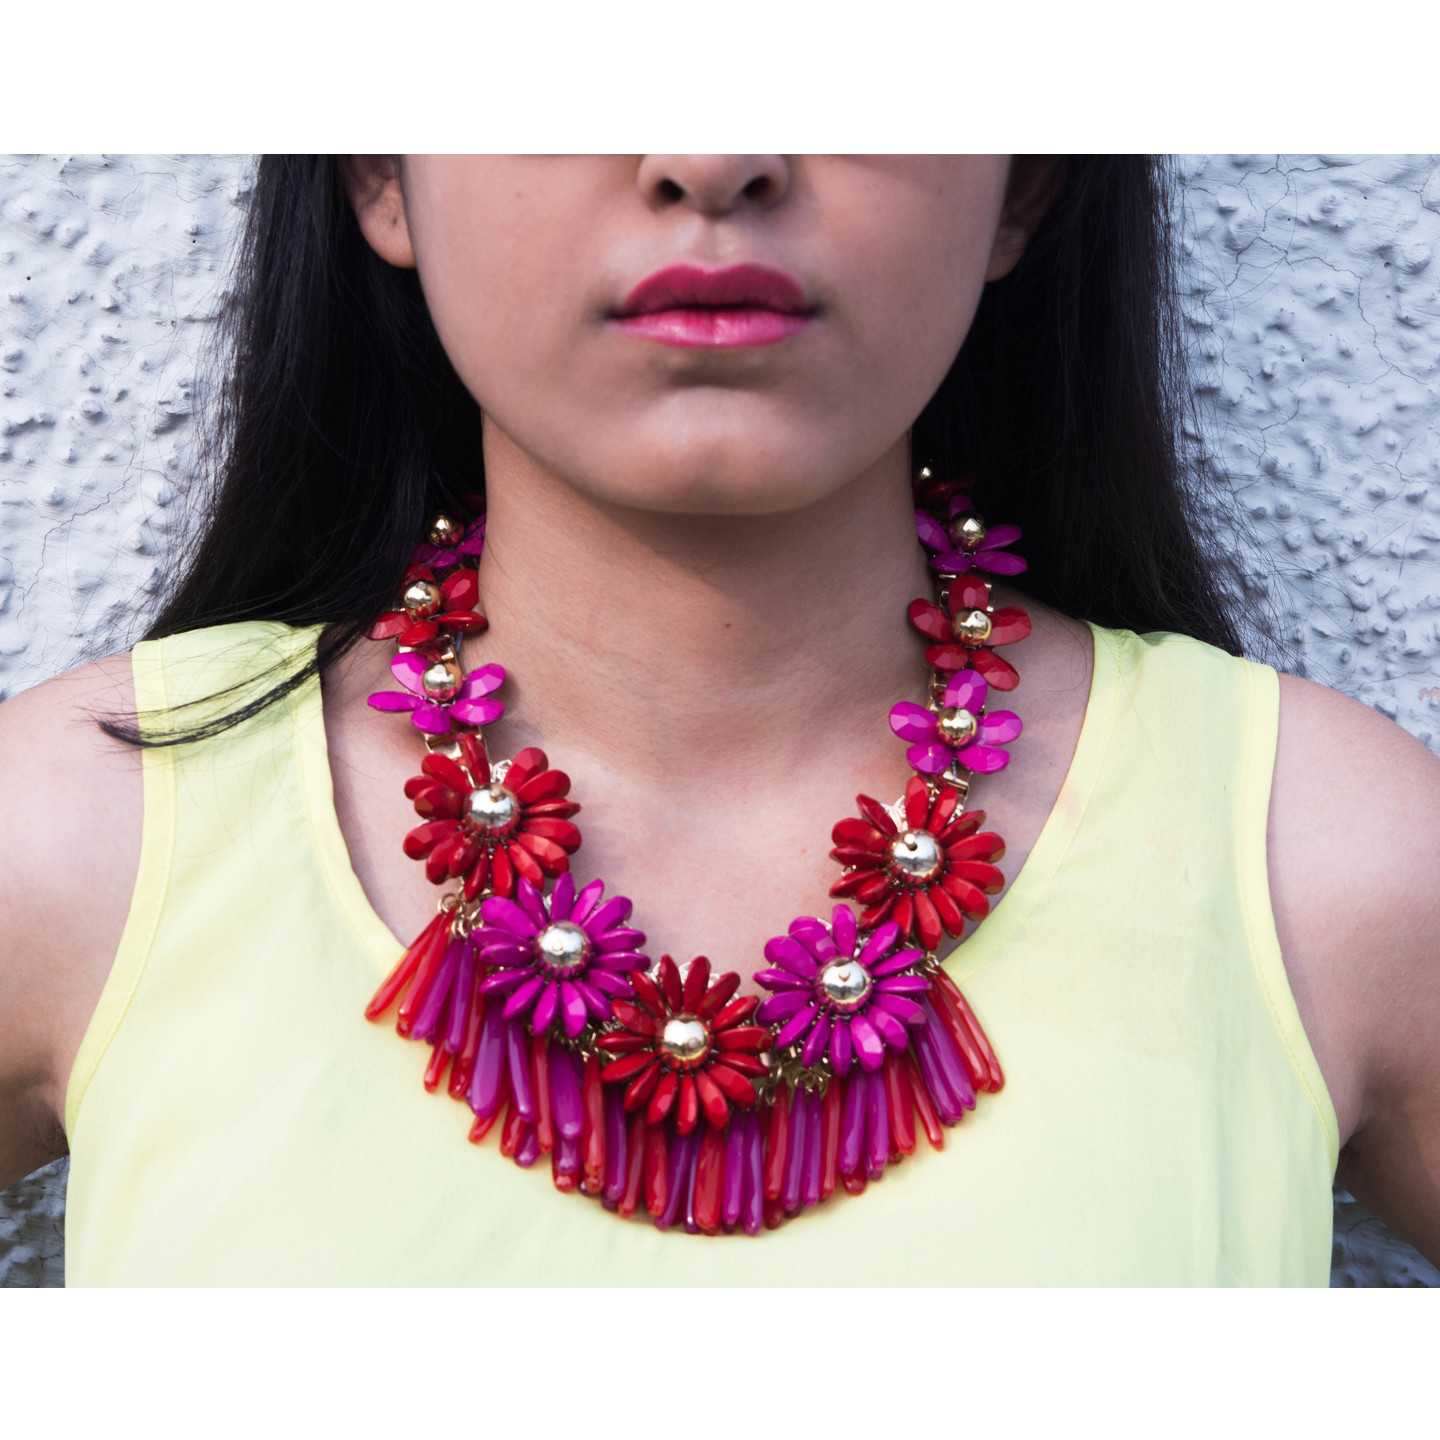 Flora Love Layer Necklace